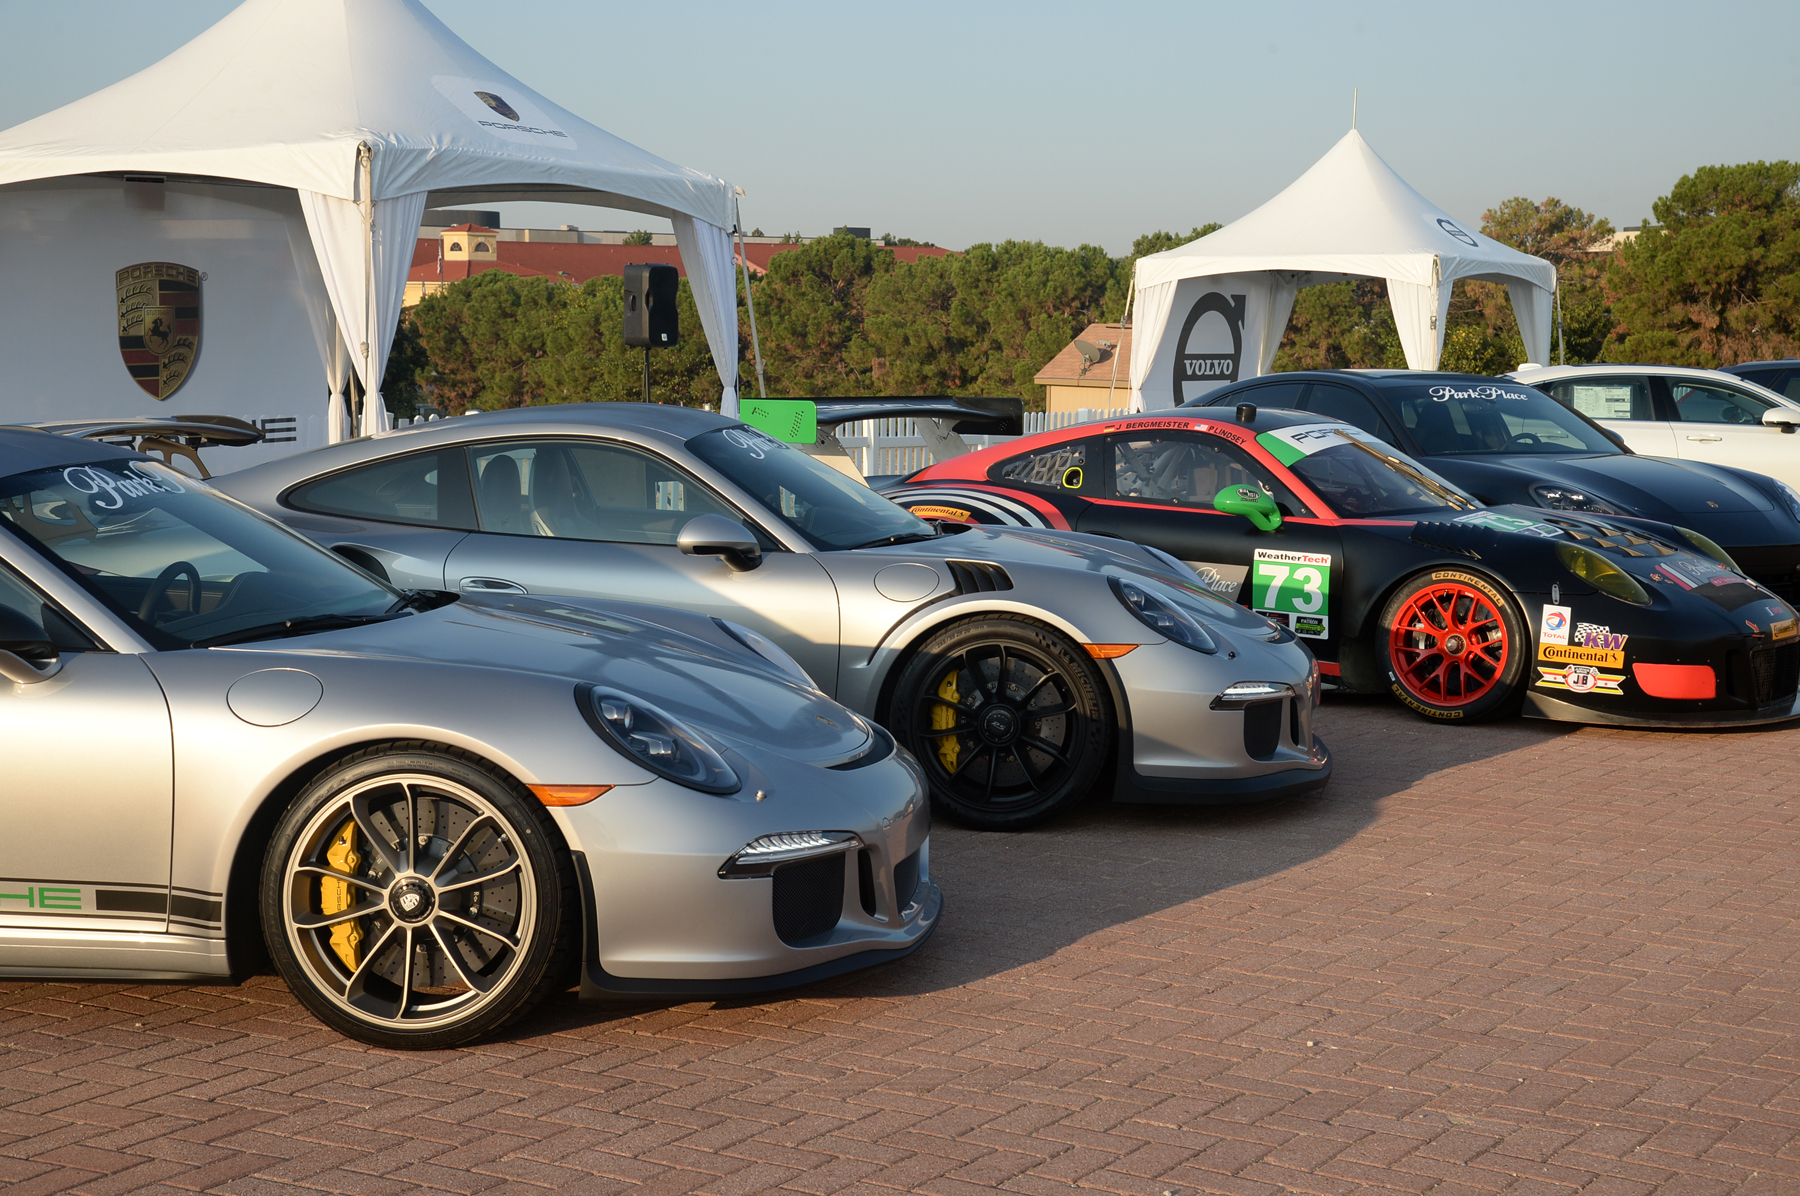 10 Exotic Cars To Get Excited To See At The Park Place Luxury Supercar Showcase Dallasites101